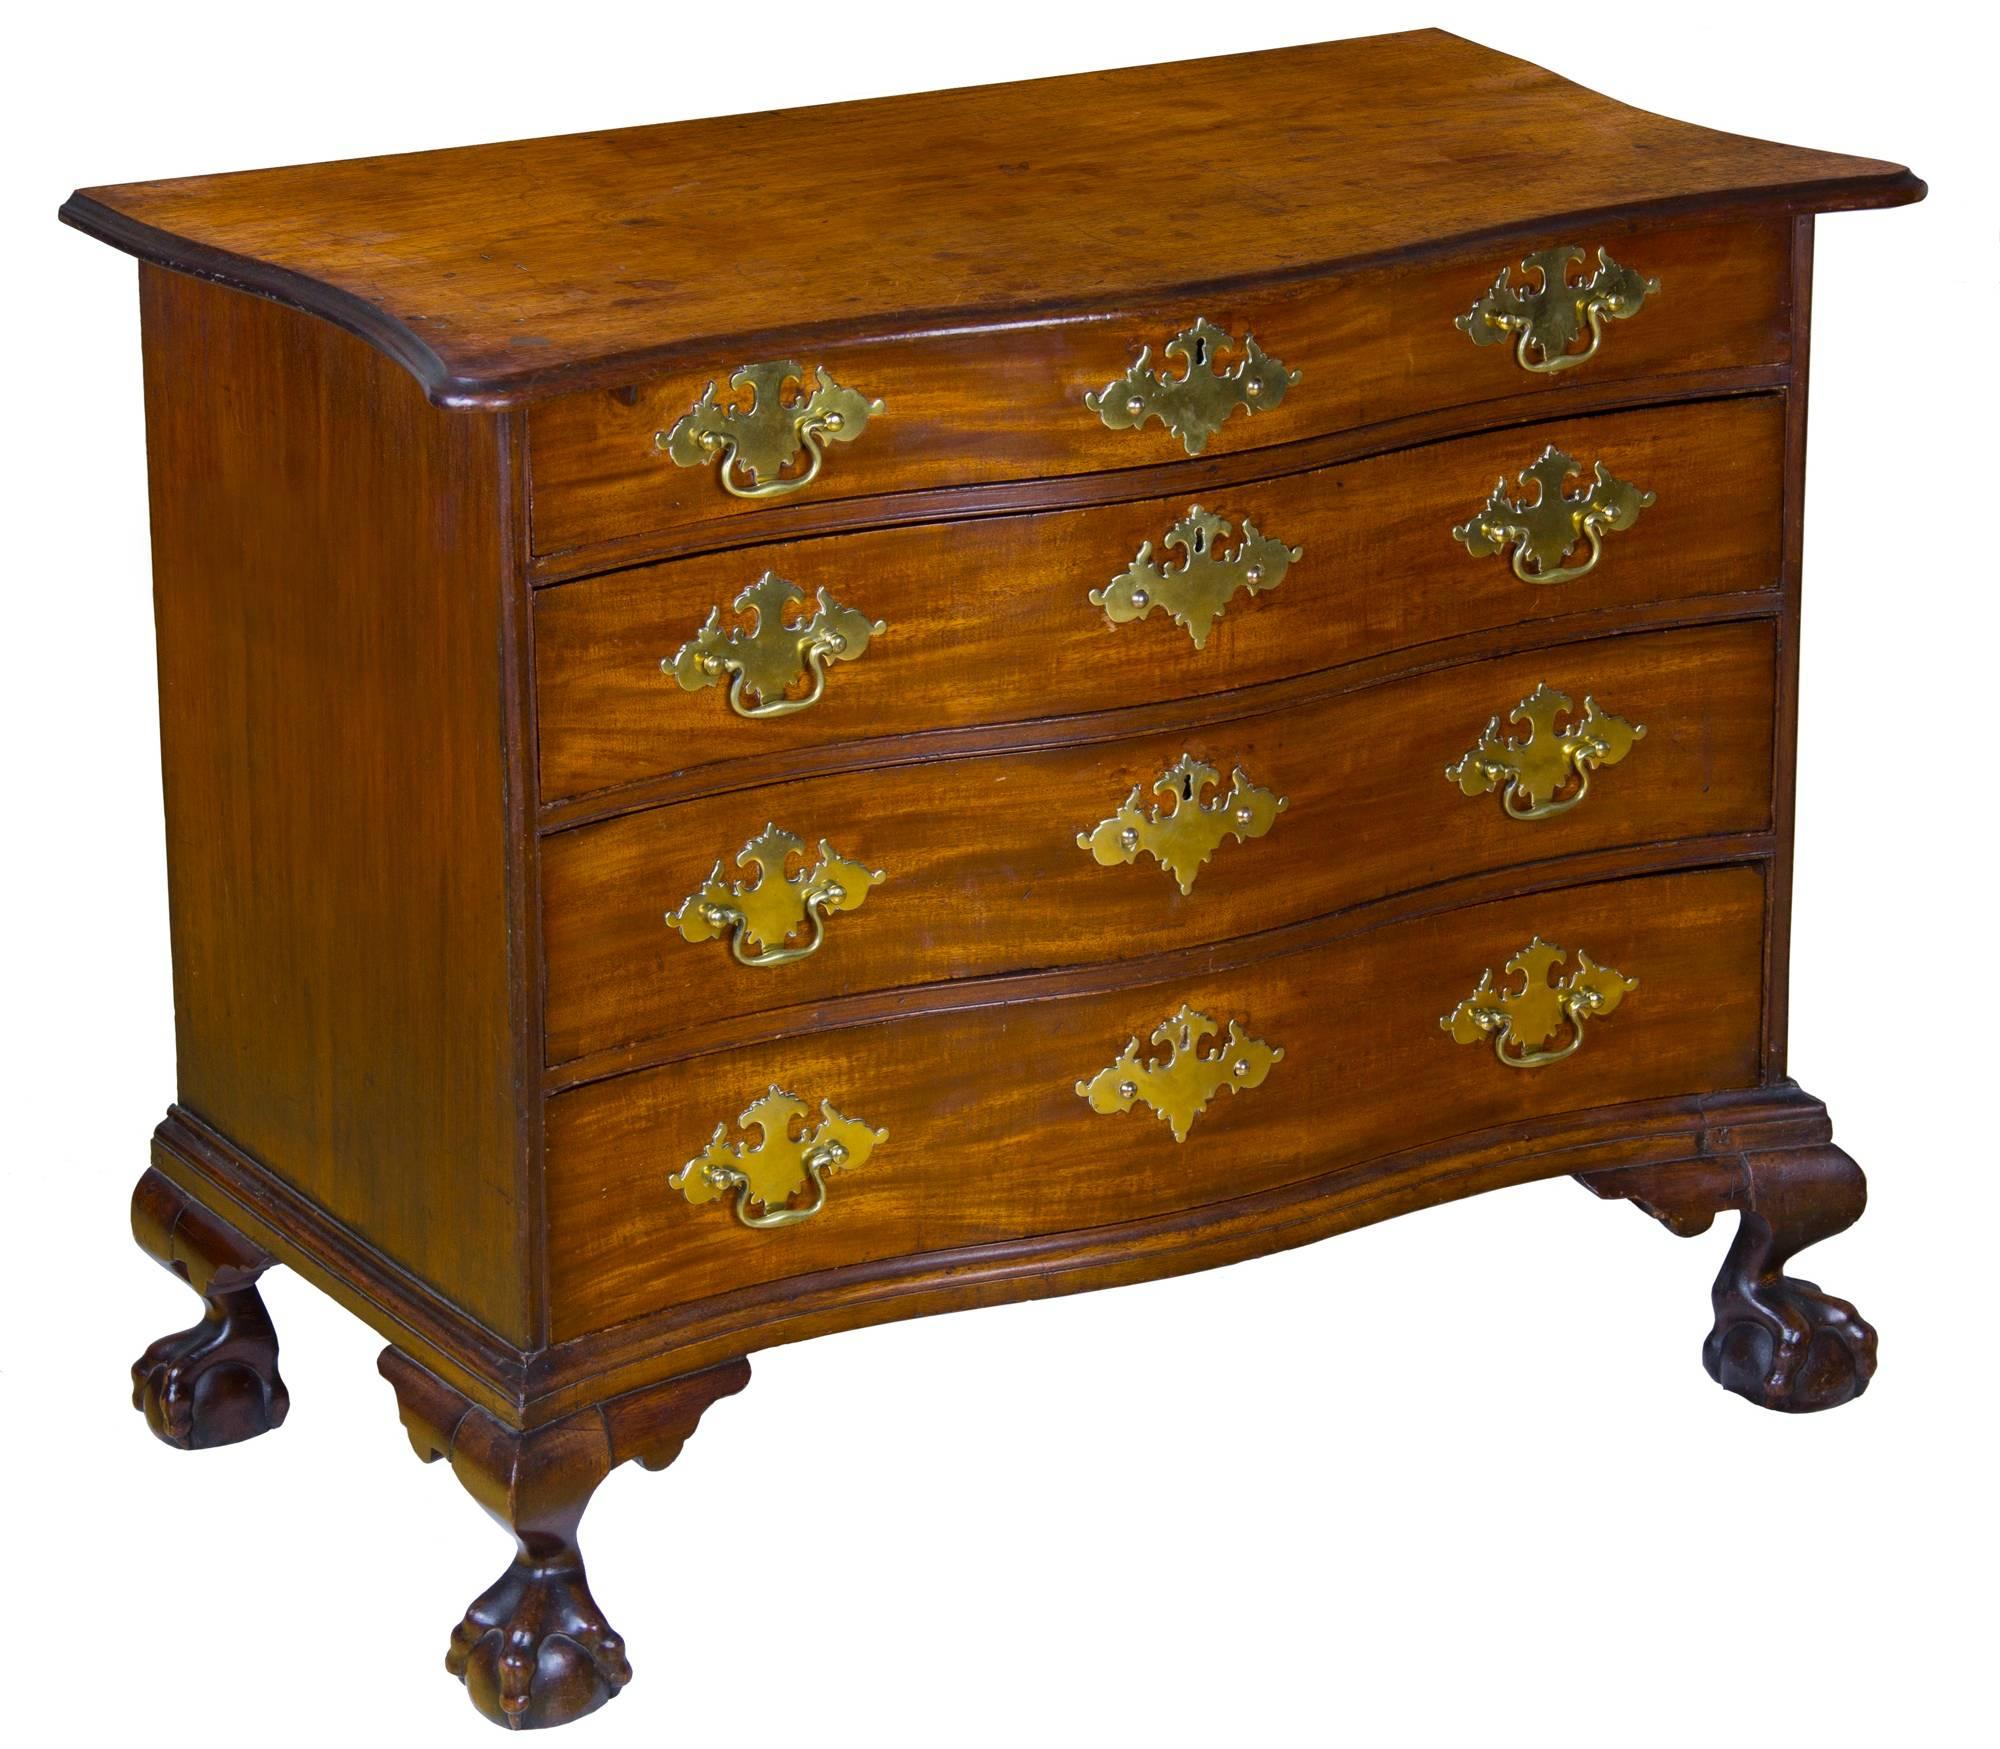 This is a most impressive piece, the best of what came out of Boston in the last quarter of the 18th century. It is exceptional in the proportion of the elegant serpentine aristocratic form of its drawers, to the bold claw and ball feet on well